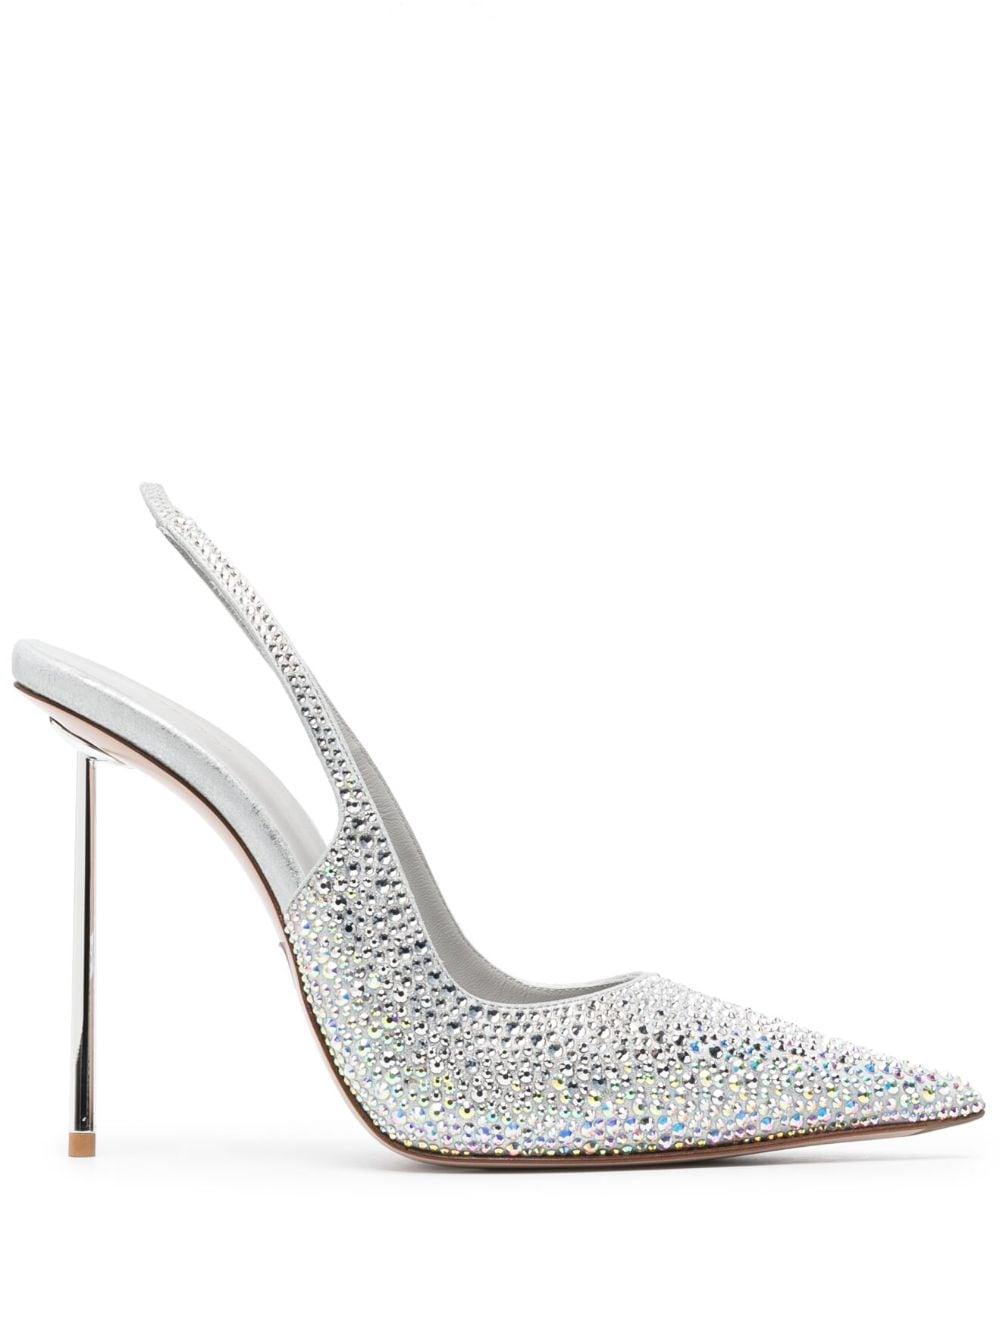 Le Silla Crystal-embellished High-heel Pumps in White | Lyst